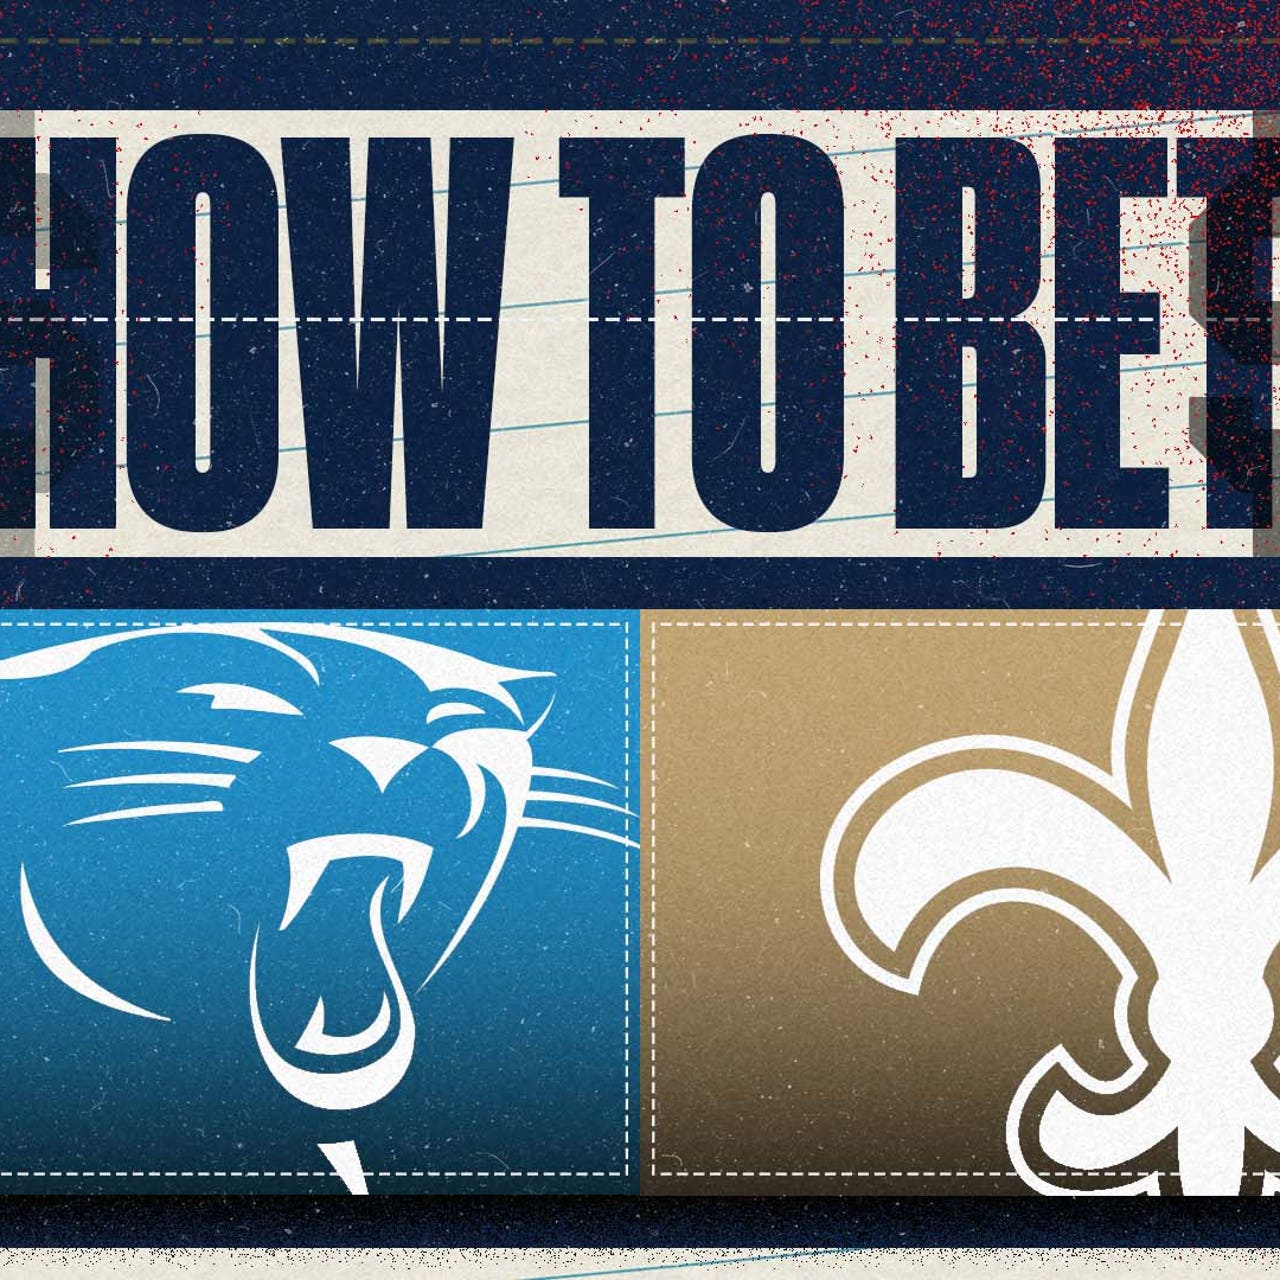 Saints vs. Panthers: Where to watch, betting odds, series history and more